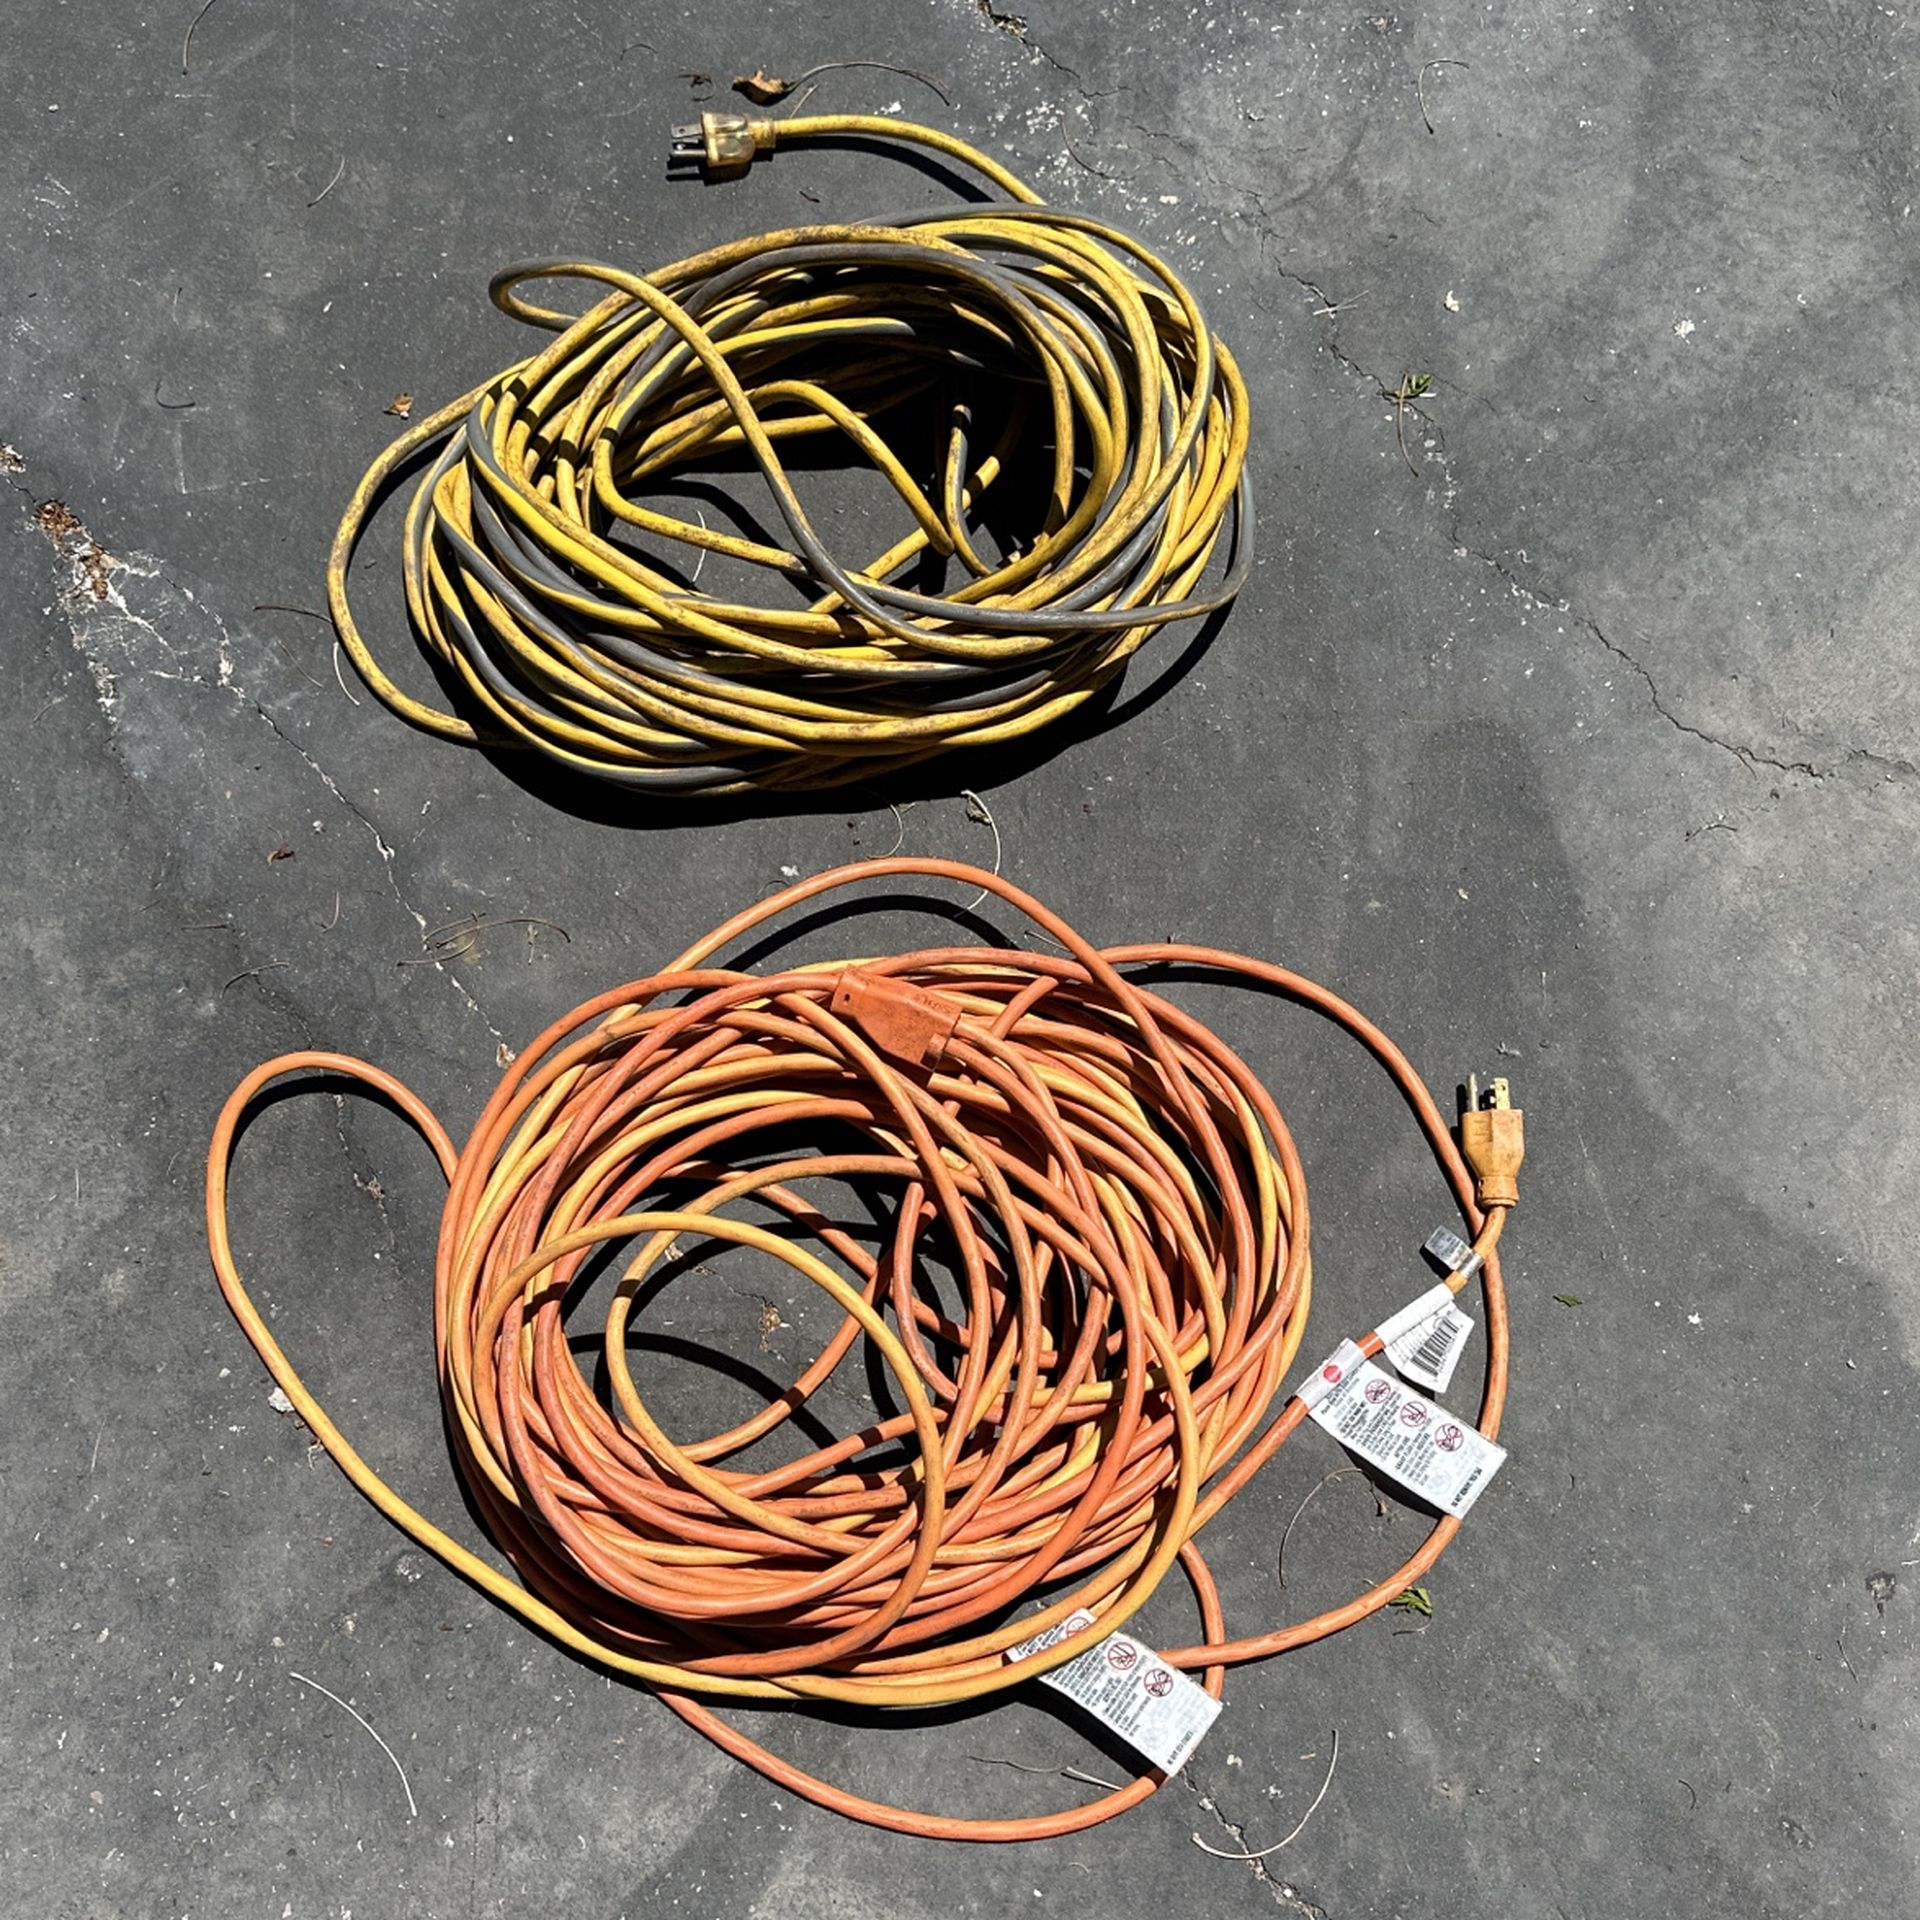 2 100 Ft Extension Cords, One Like New With Tags